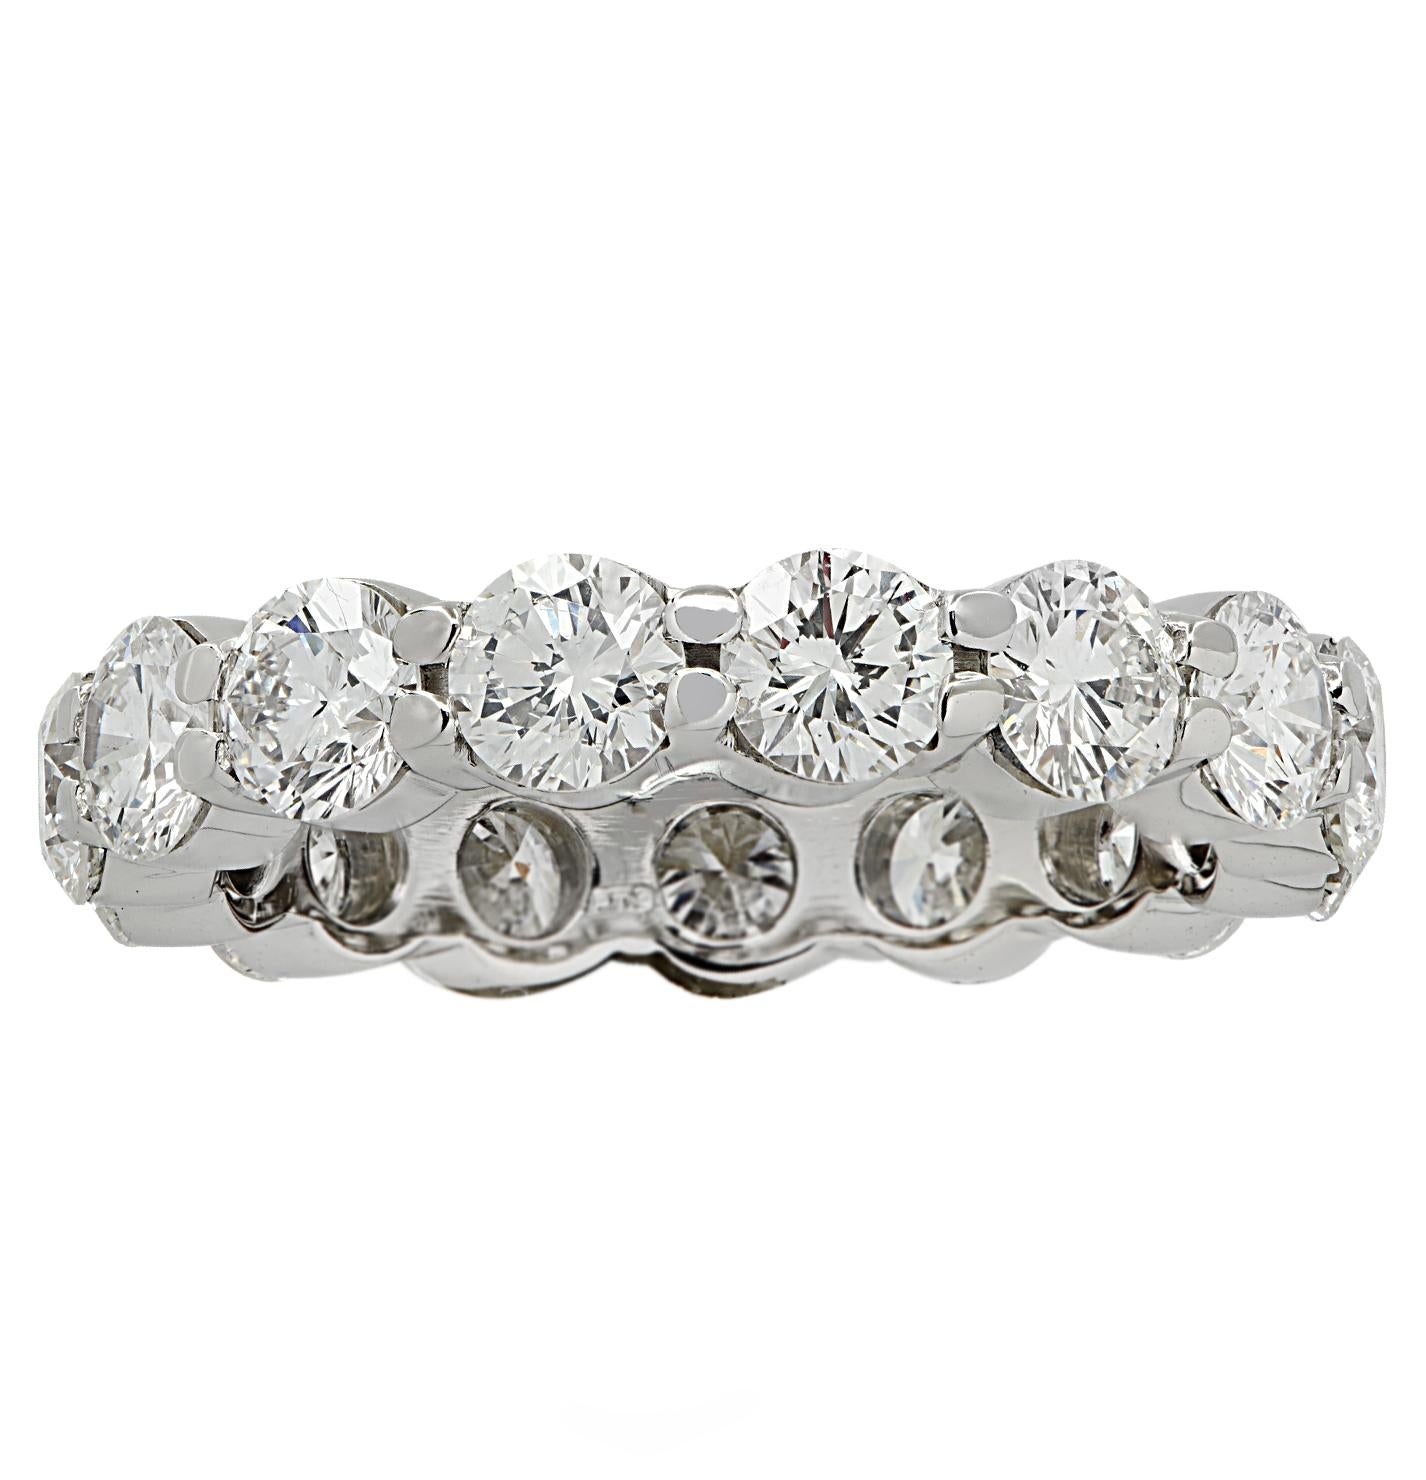 Exquisite eternity band crafted in Platinum, showcasing 15 stunning round brilliant cut diamonds weighing 2.7 carats total, G color, VS-SI clarity. Each diamond is carefully selected, perfectly matched and set in a seamless sea of eternity, creating